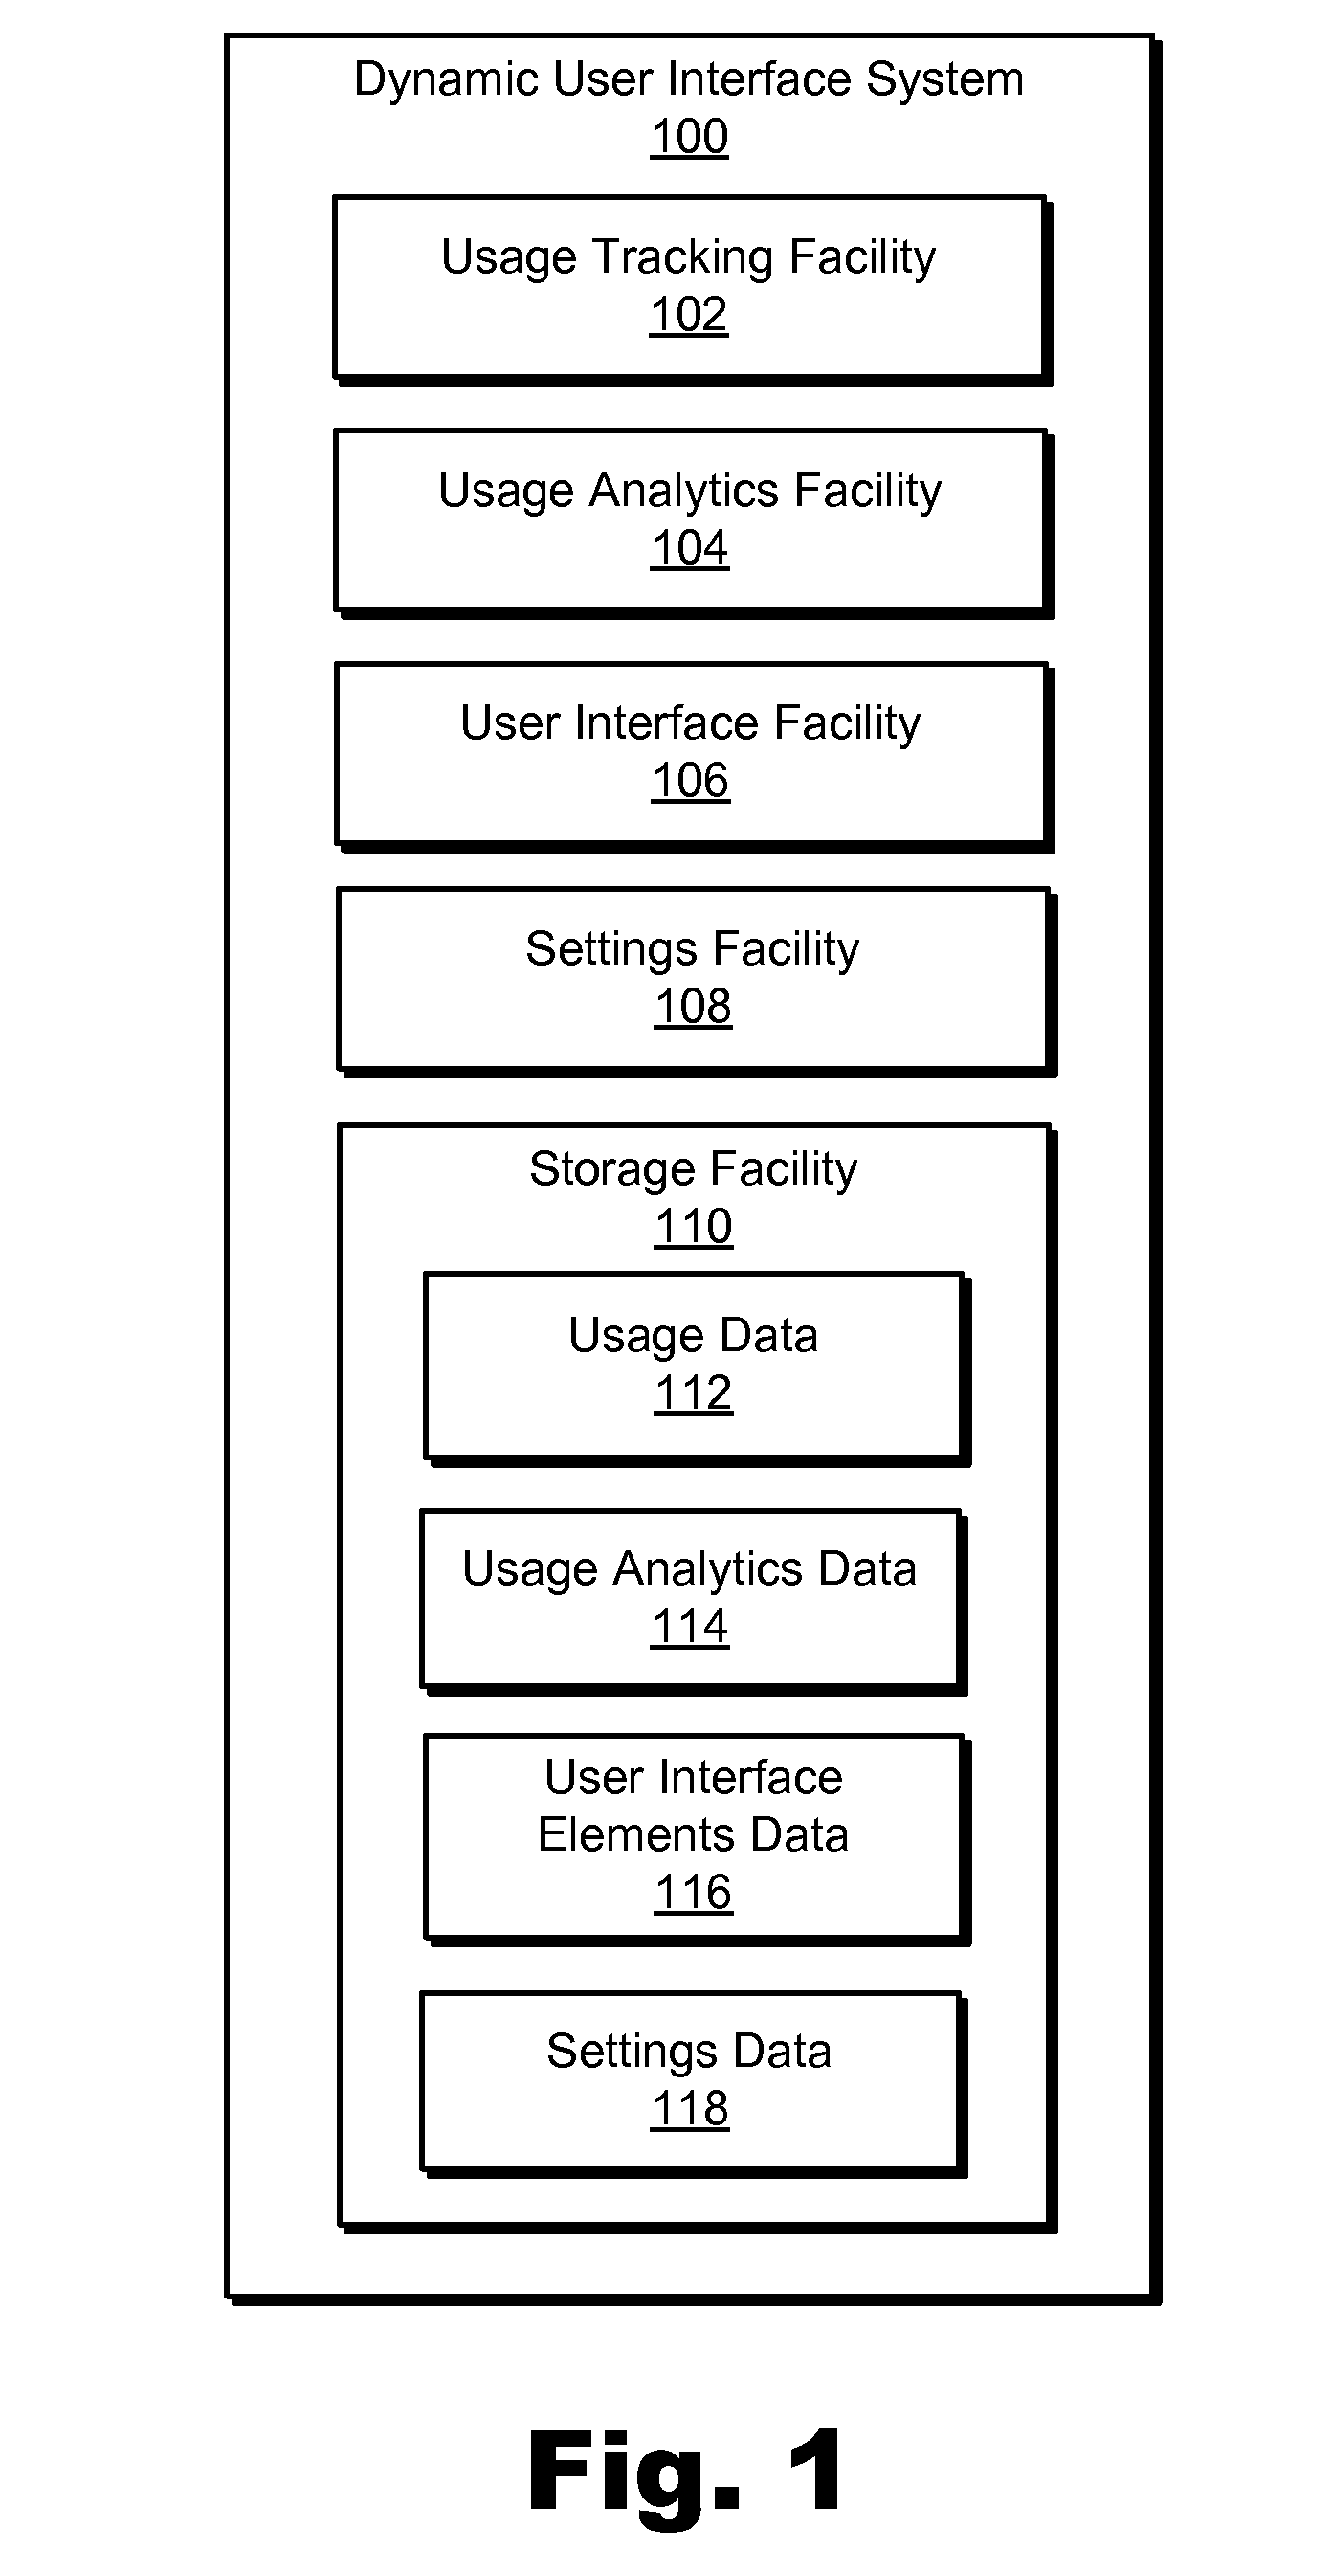 Dynamic user interface rendering based on usage analytics data in a media content distribution system